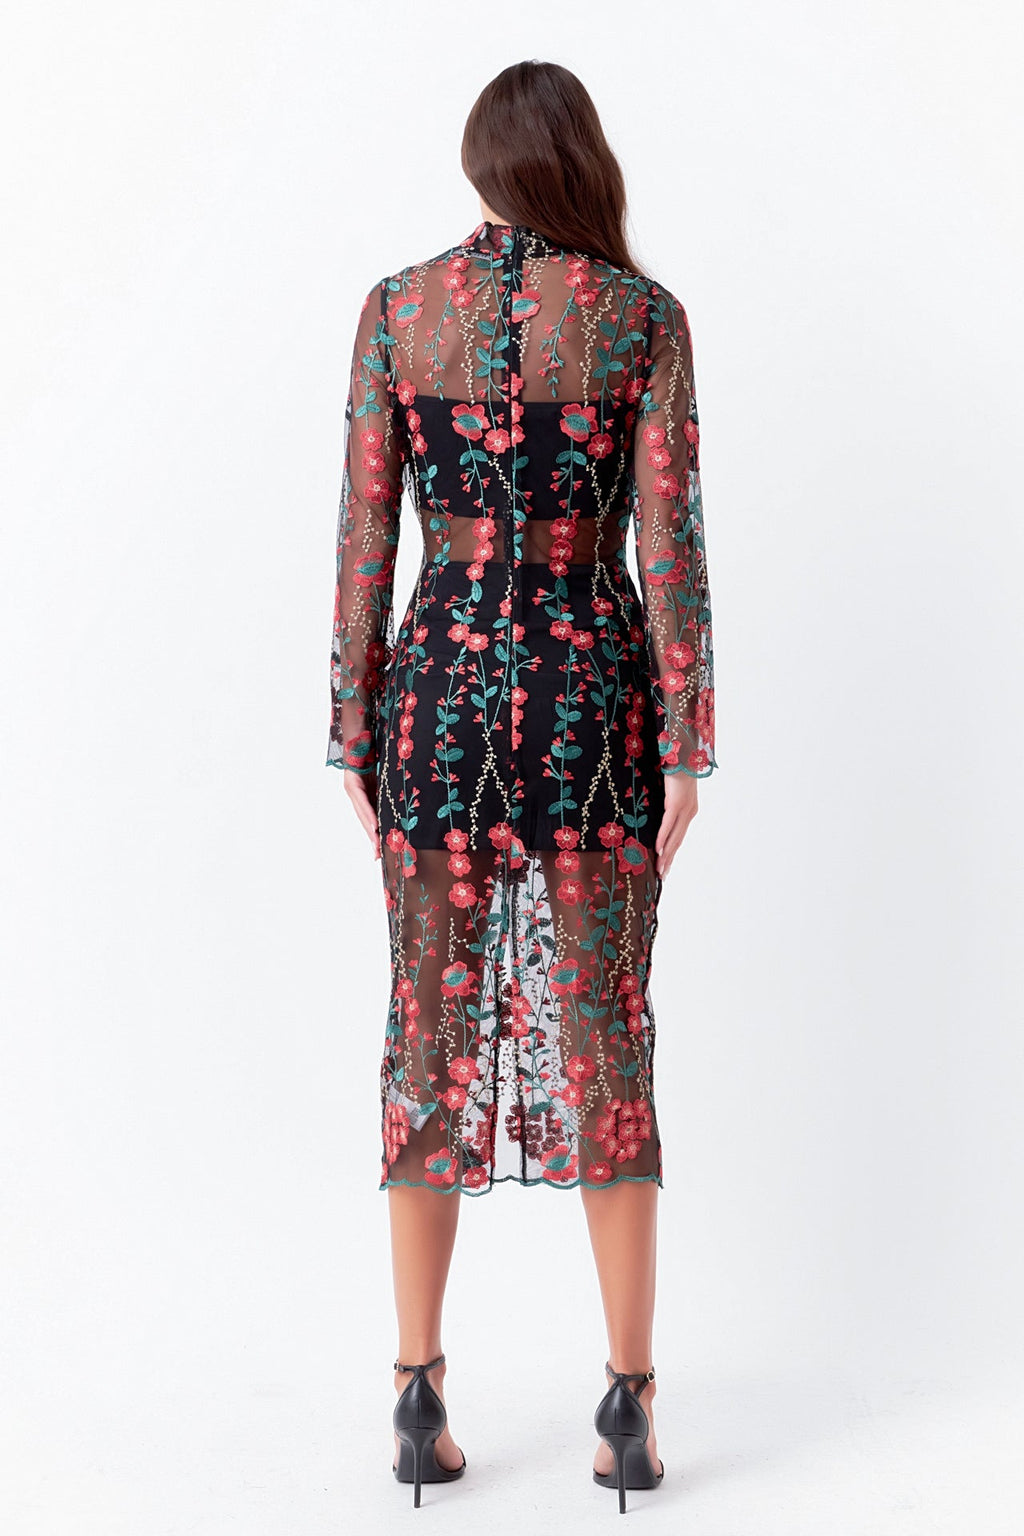 ENDLESS ROSE-Floral Embroidered Midi Dress-DRESSES available at Objectrare